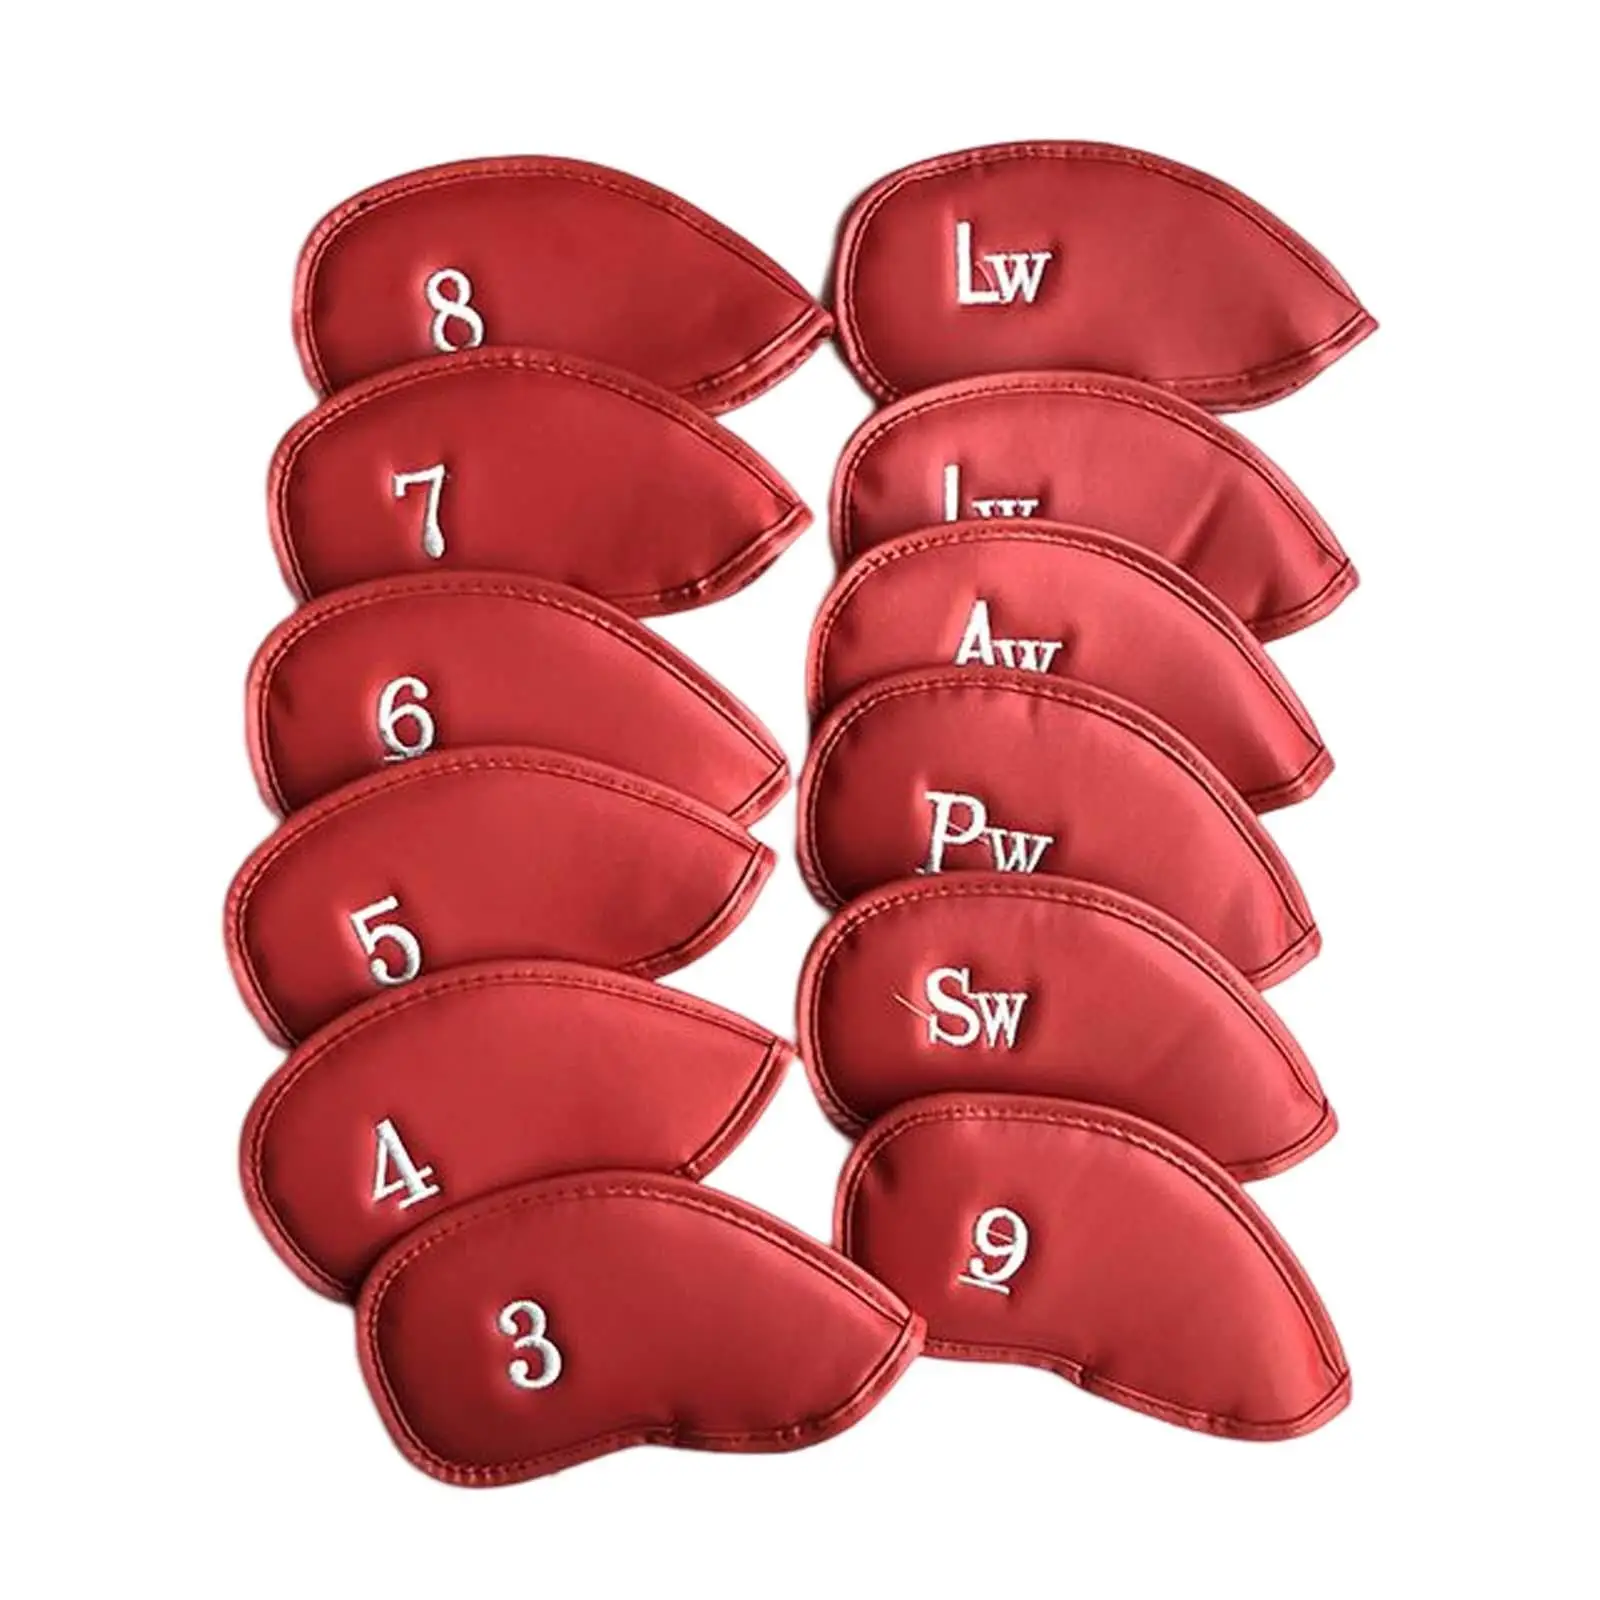 

12Pcs PU Leather Golf Iron Headcover Set Golf Club Head Covers Protect Case for Golf Clubs Irons Fit All Brands Golfer Equipment